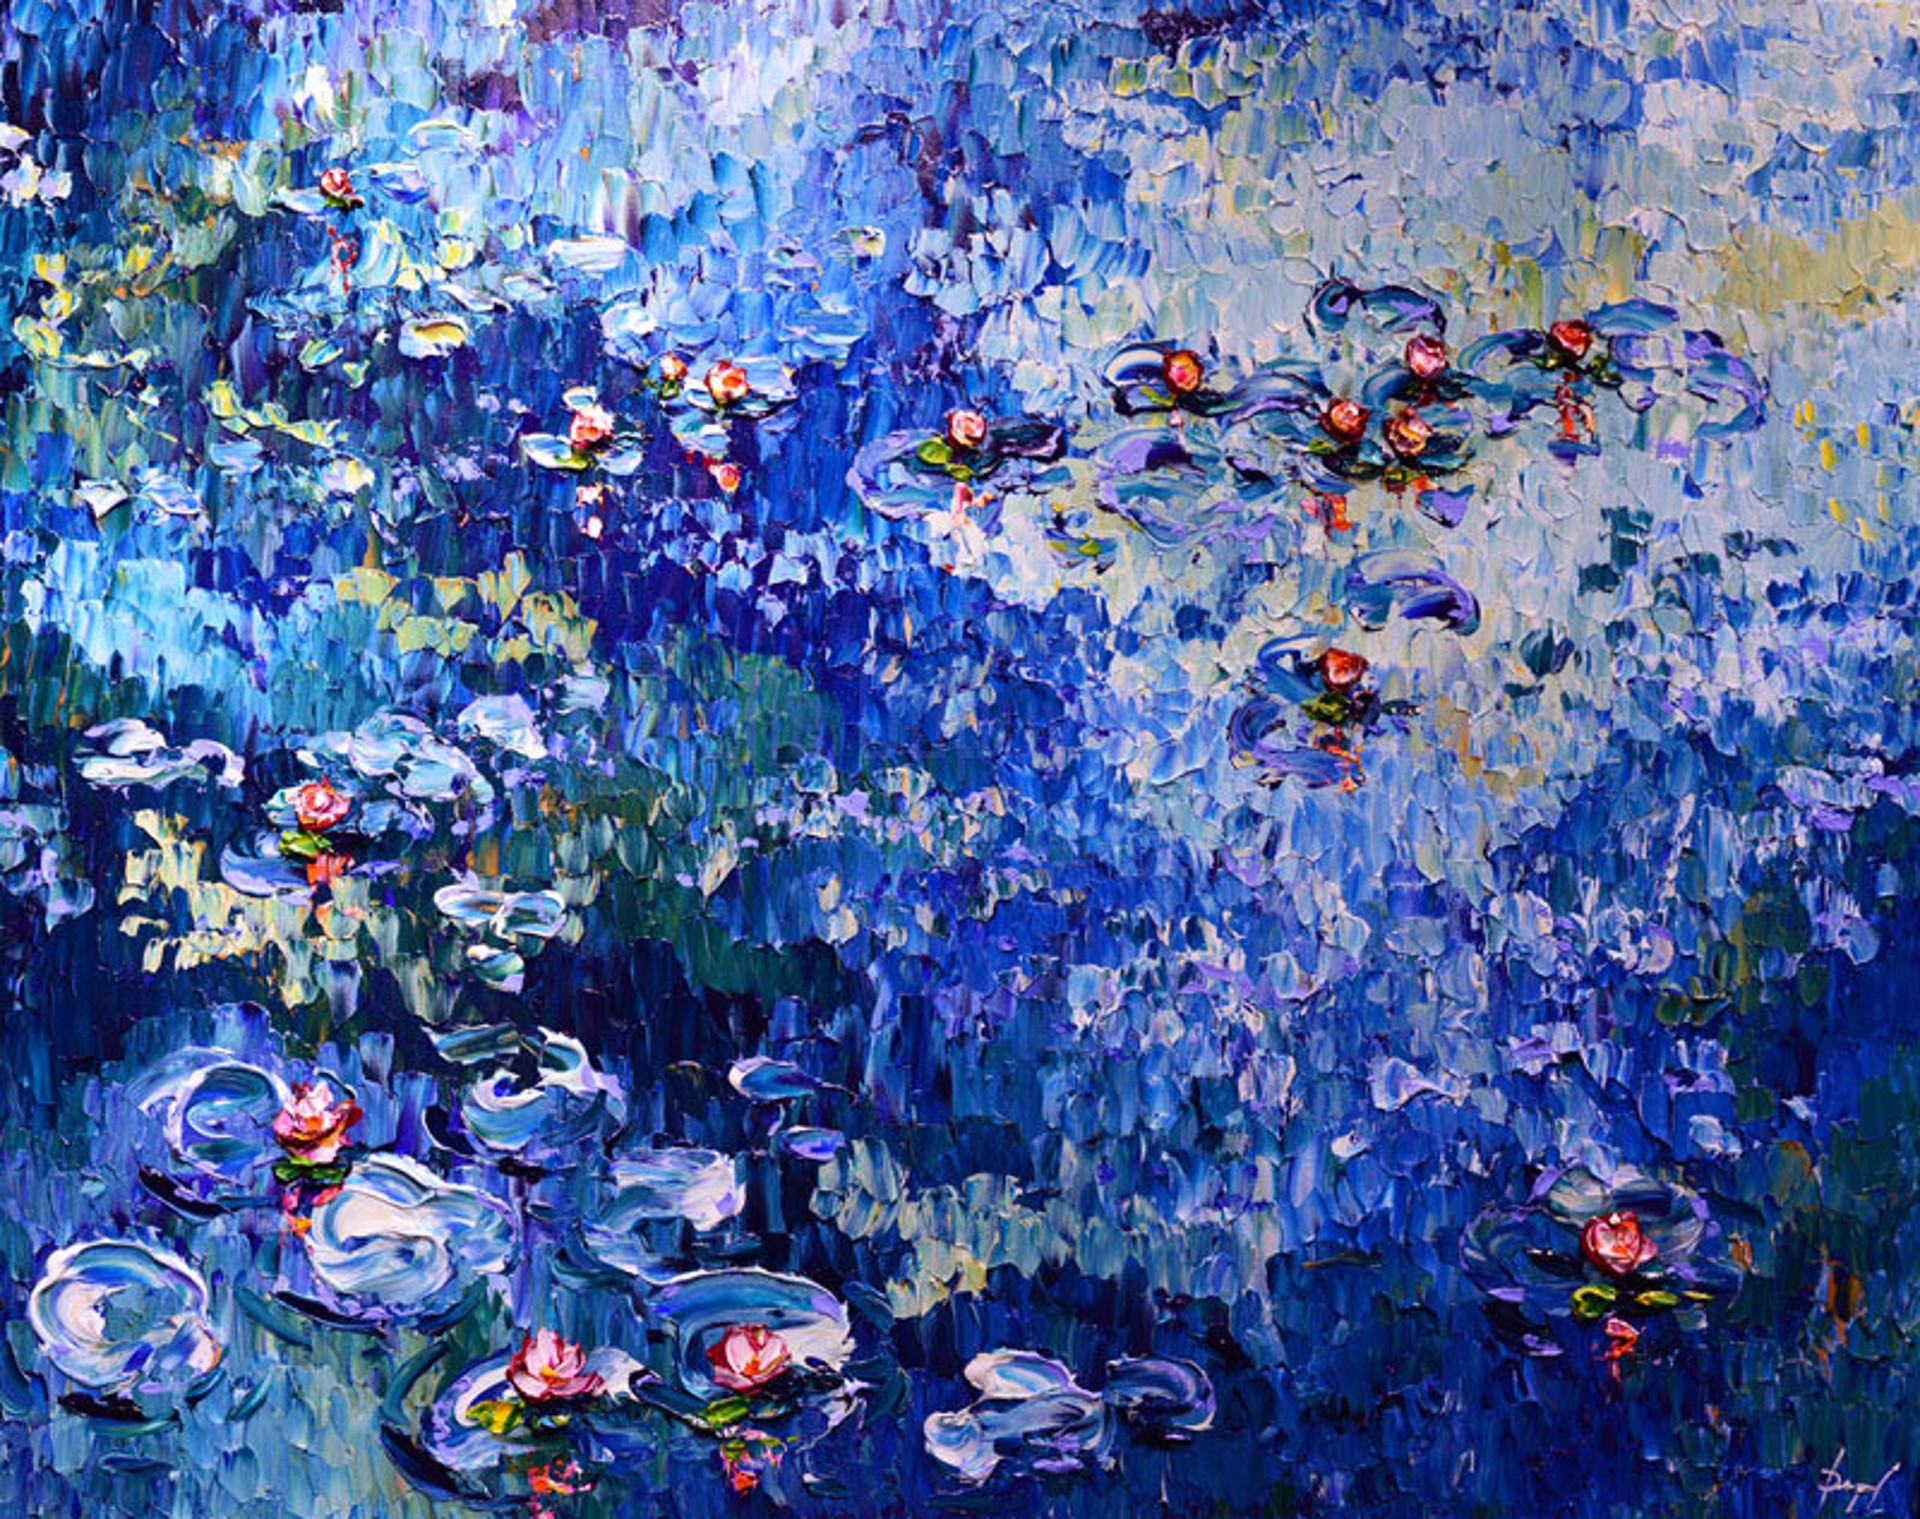 Bright Lilies of Colorful Reflections 48x60 by Isabelle Dupuy